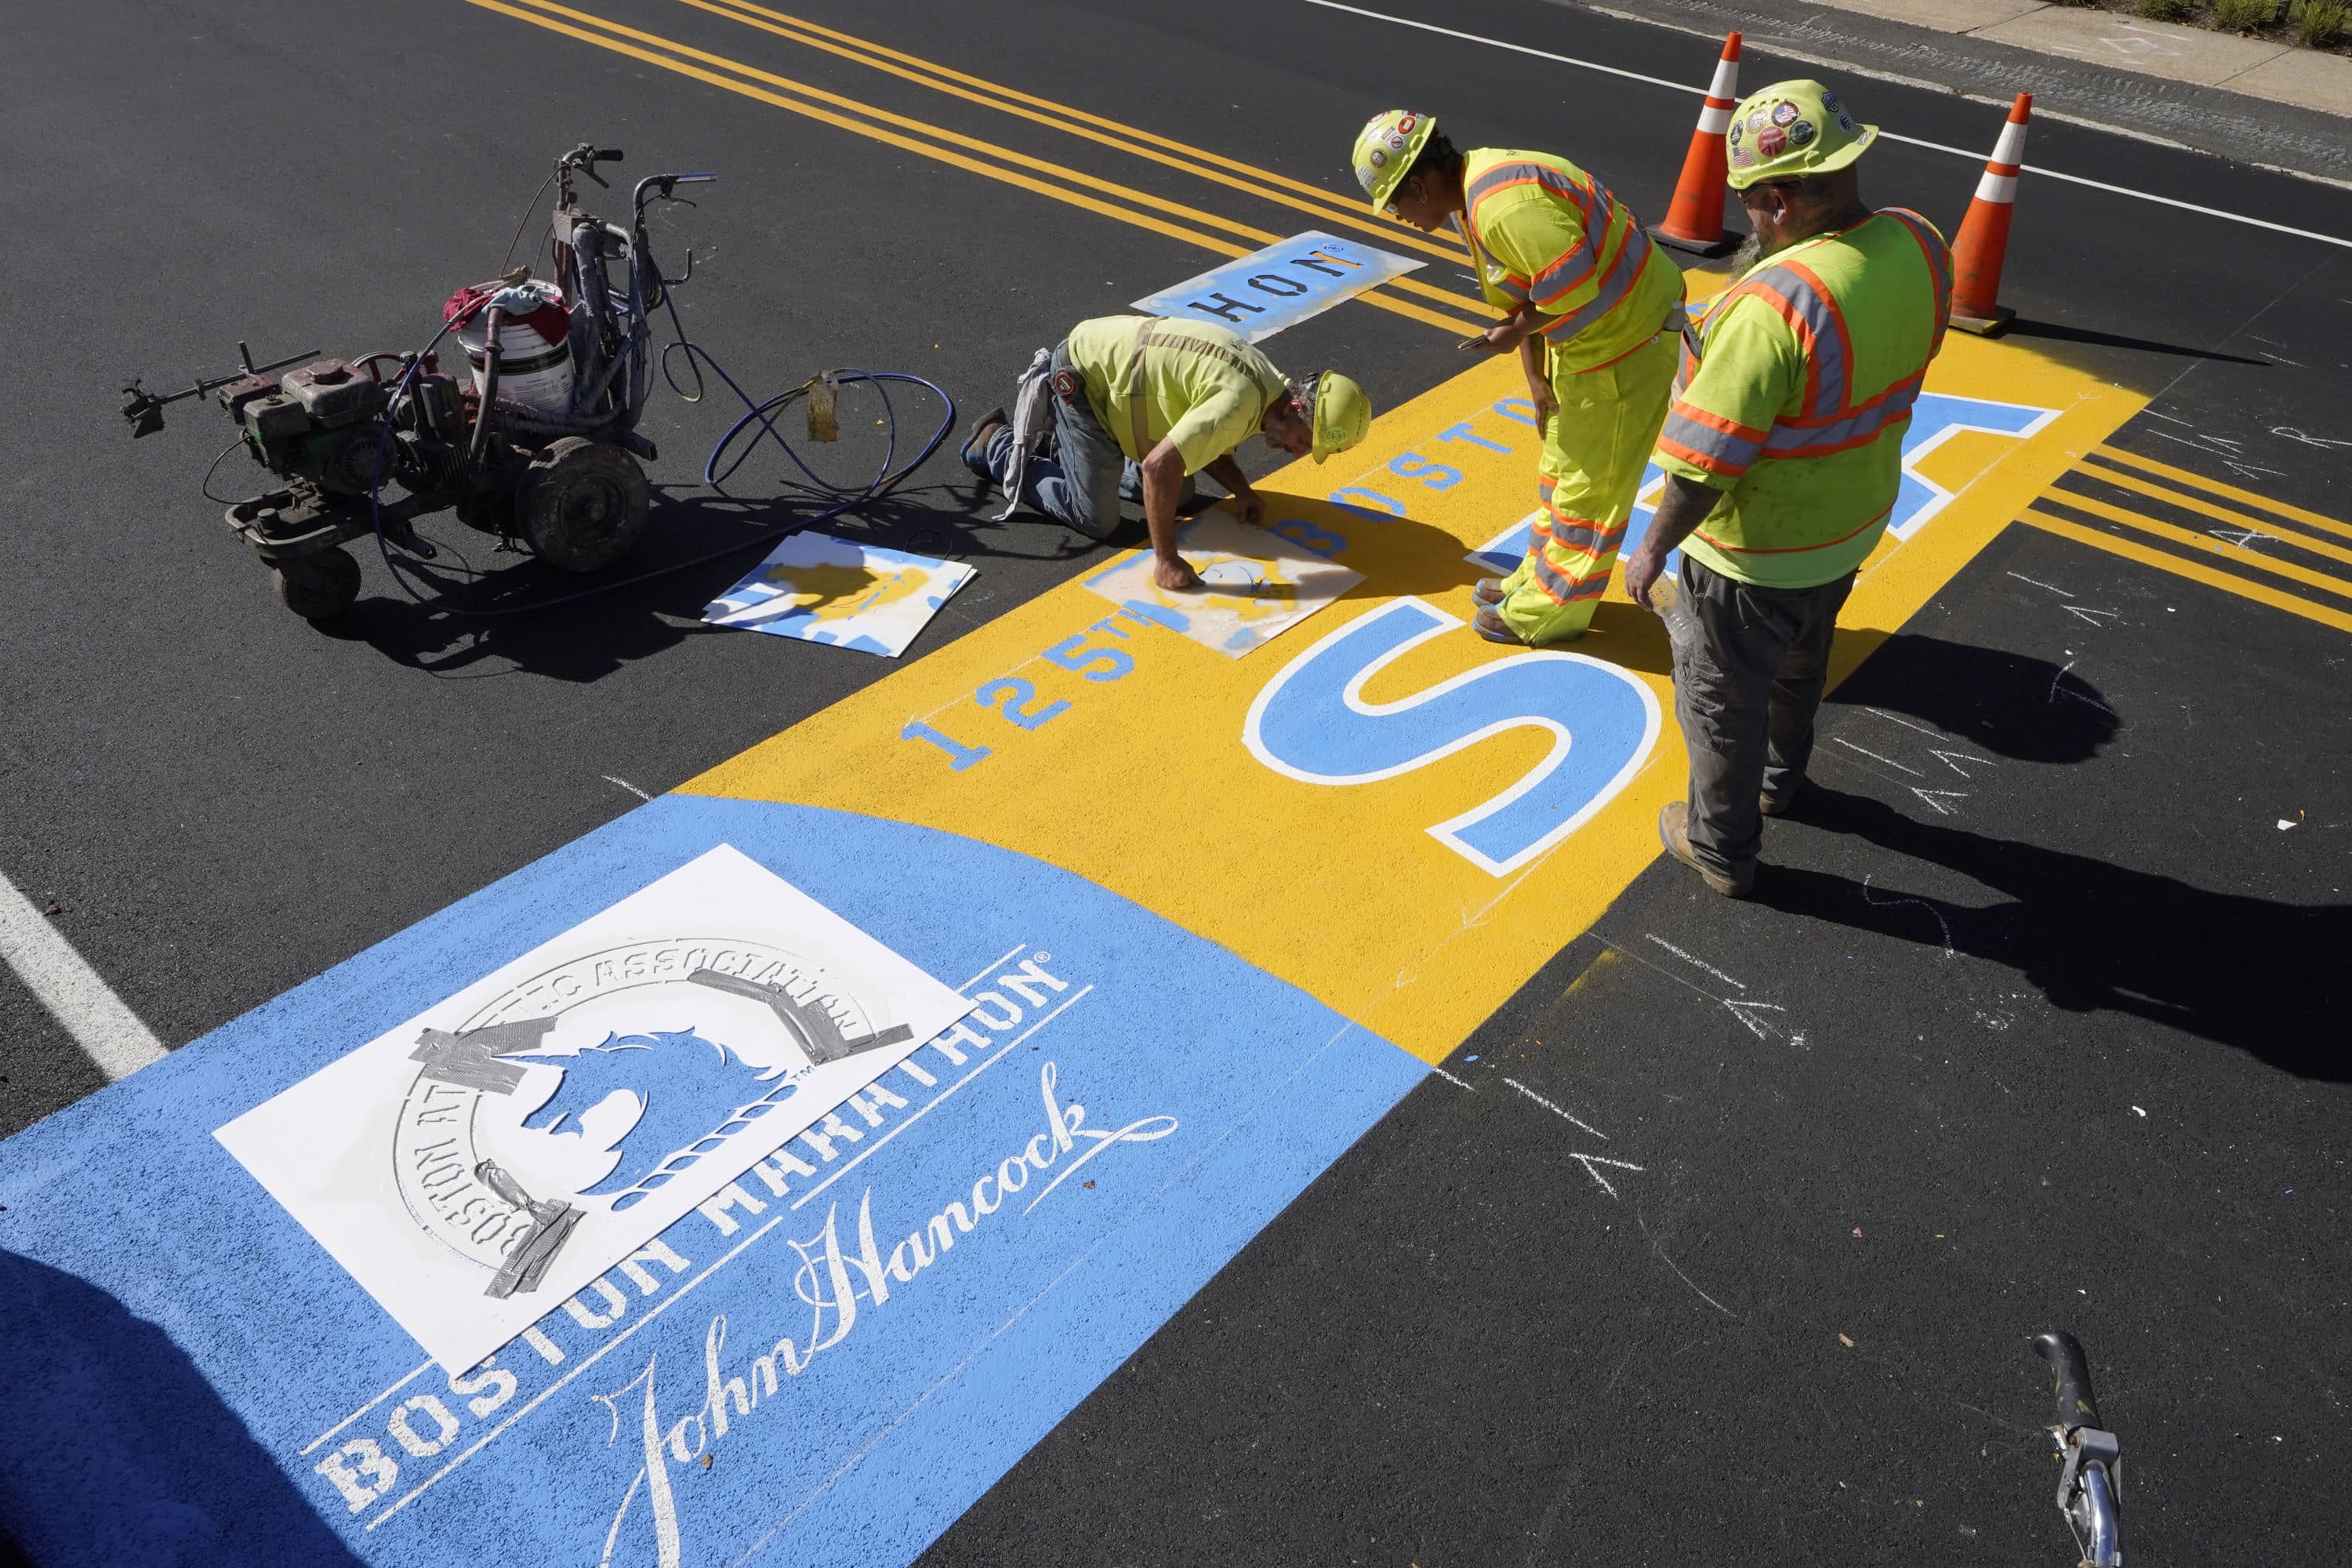 Painter Will Belezos, of Holbrook, left, uses a stencil, Wednesday, Oct 6, 2021, while working to complete the start line for the 125th edition of the Boston Marathon, in Hopkinton. (Steven Senne/AP)